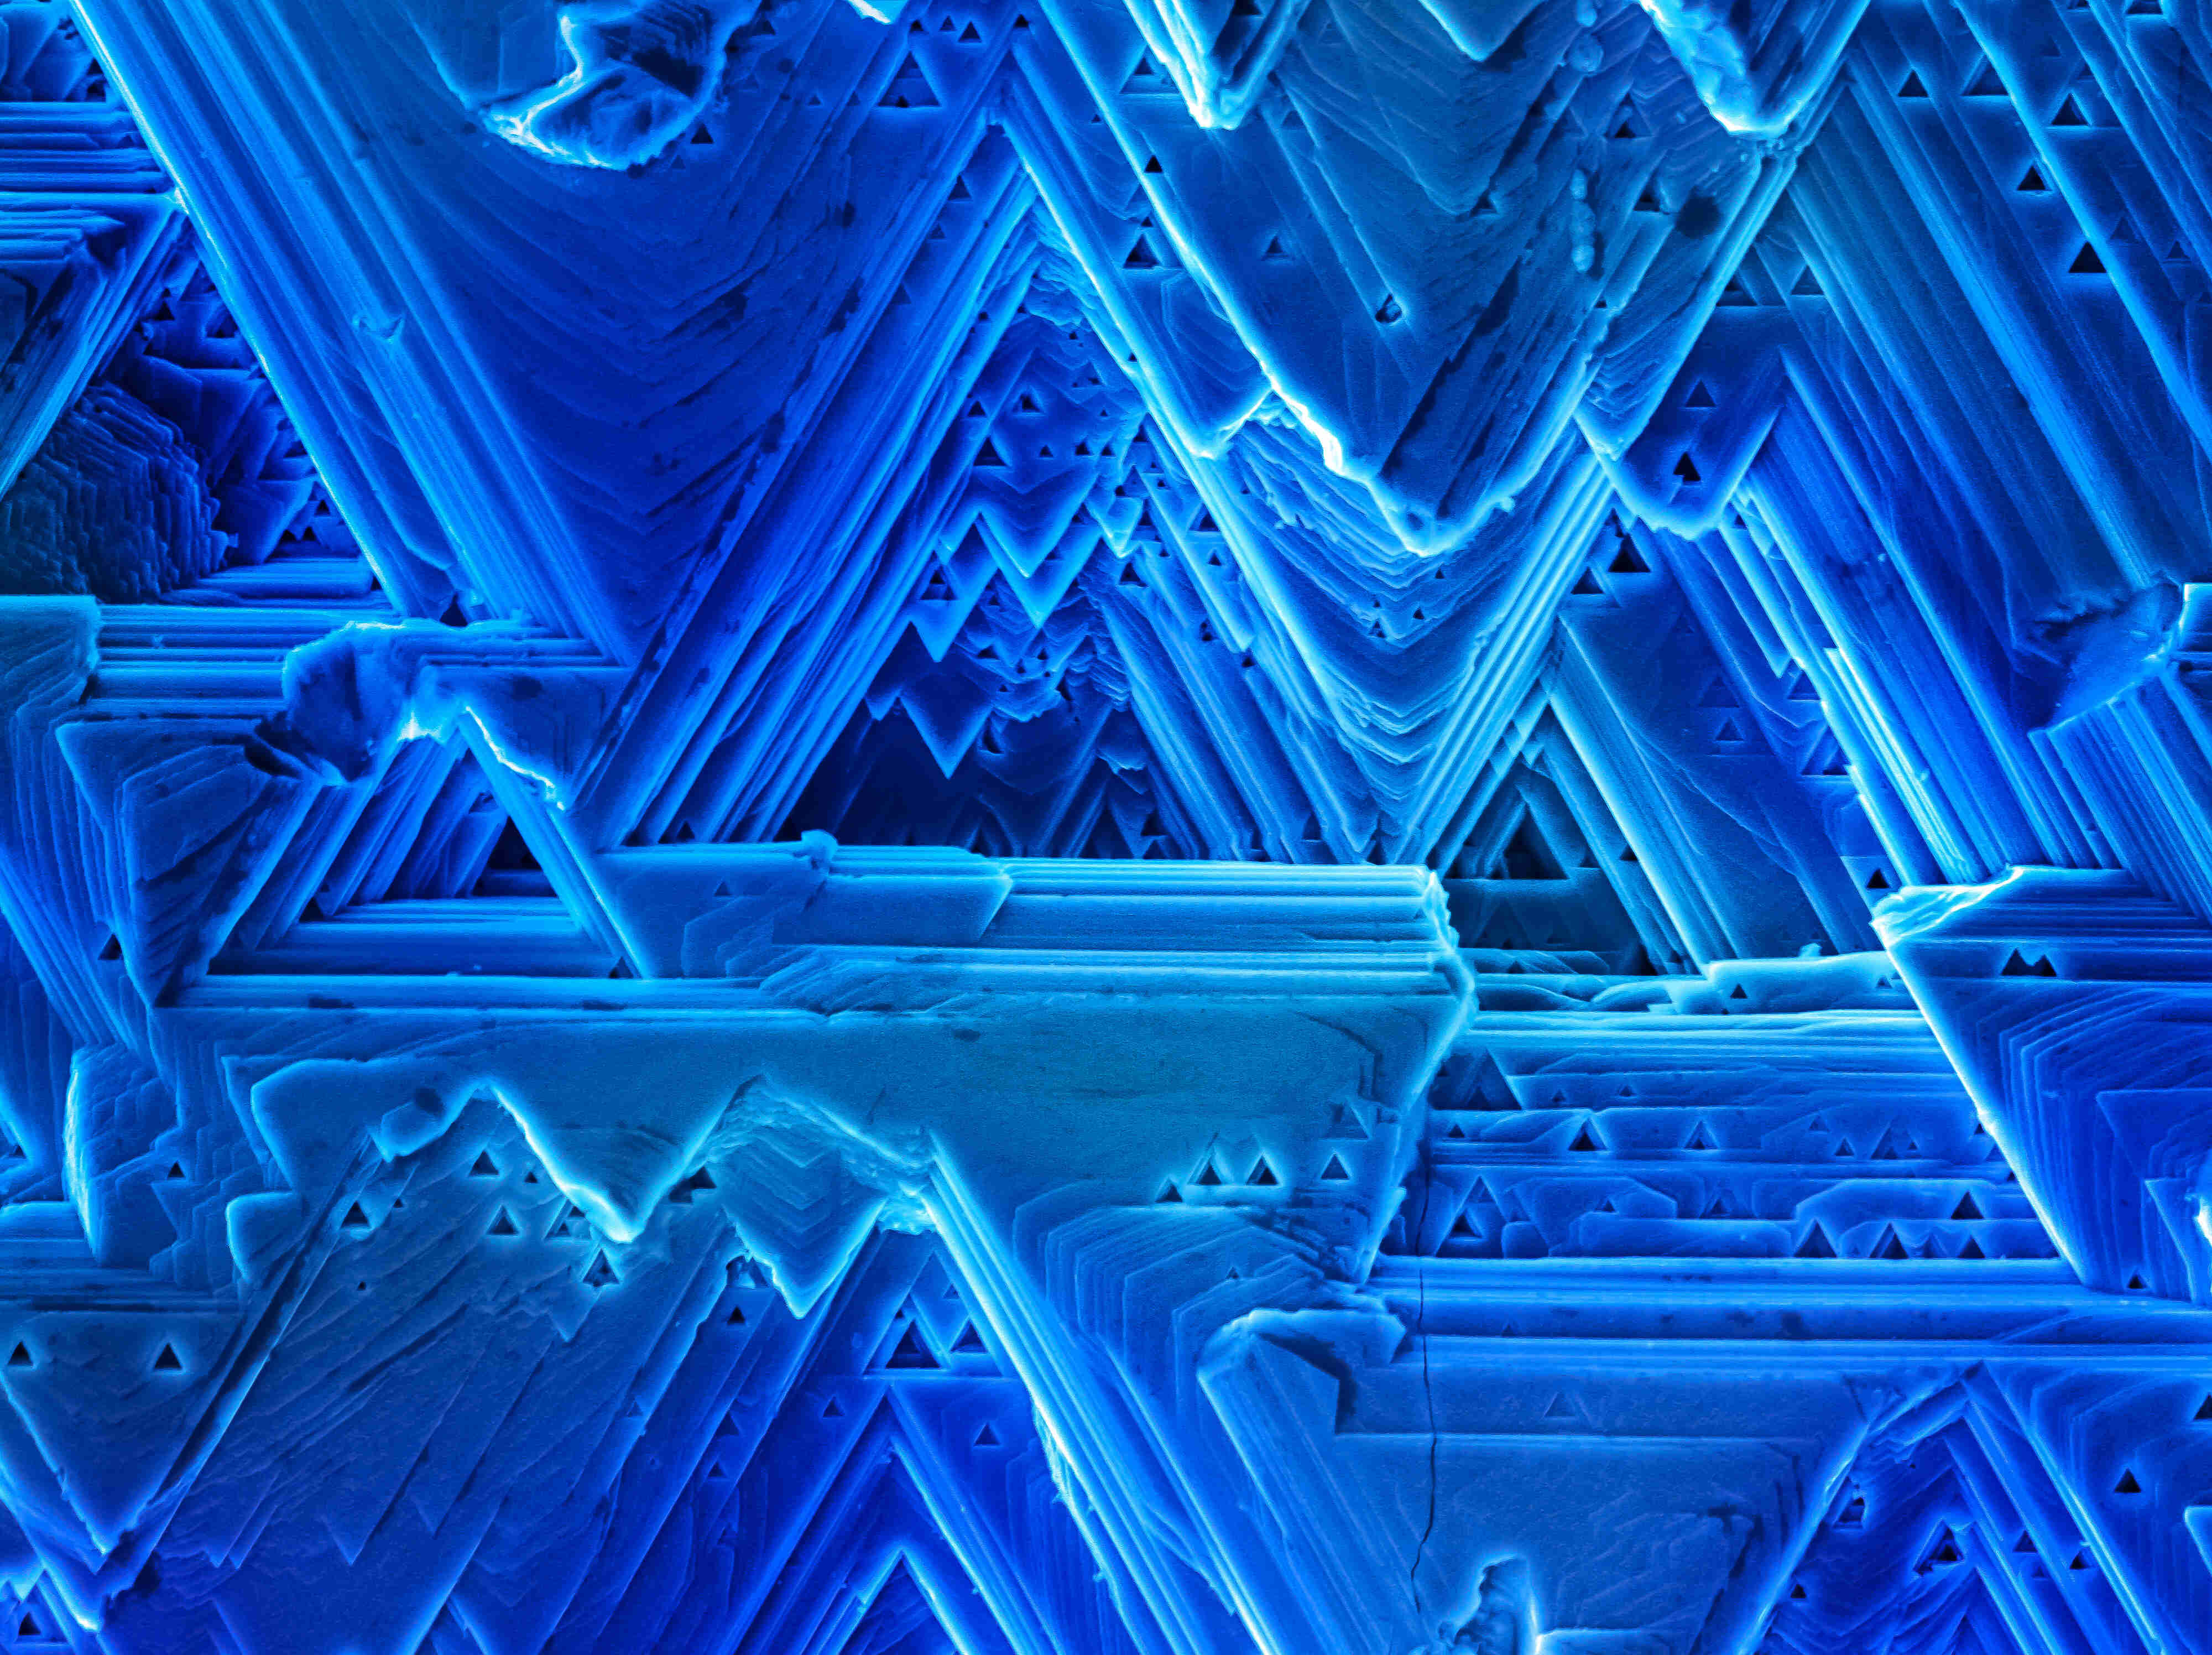 In this micrograph we observe different crystalline microstructures formed during the synthesis of a Copper semiconductor material. The way in which the crystalline layers are stacked to form this material reminds us of the way glaciers are created.